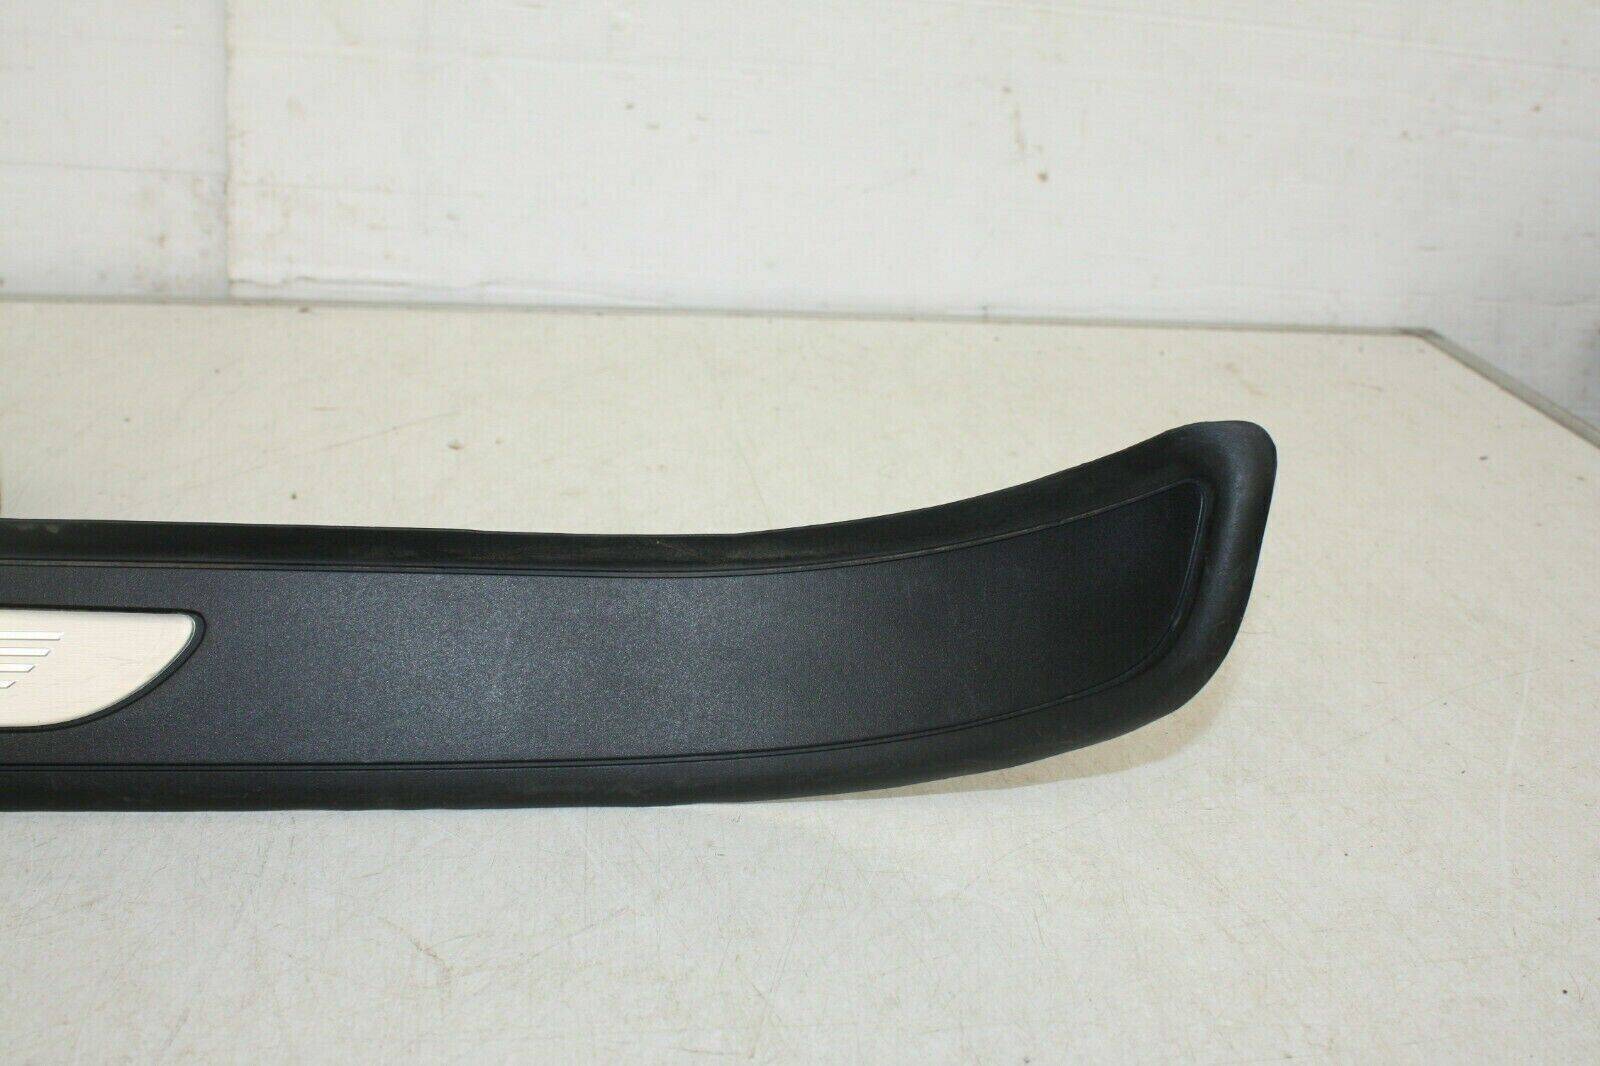 BMW-3-SERIES-FRONT-LEFT-DOOR-ENTRANCE-SILL-STRIP-2006-TO-2010-175431720438-3